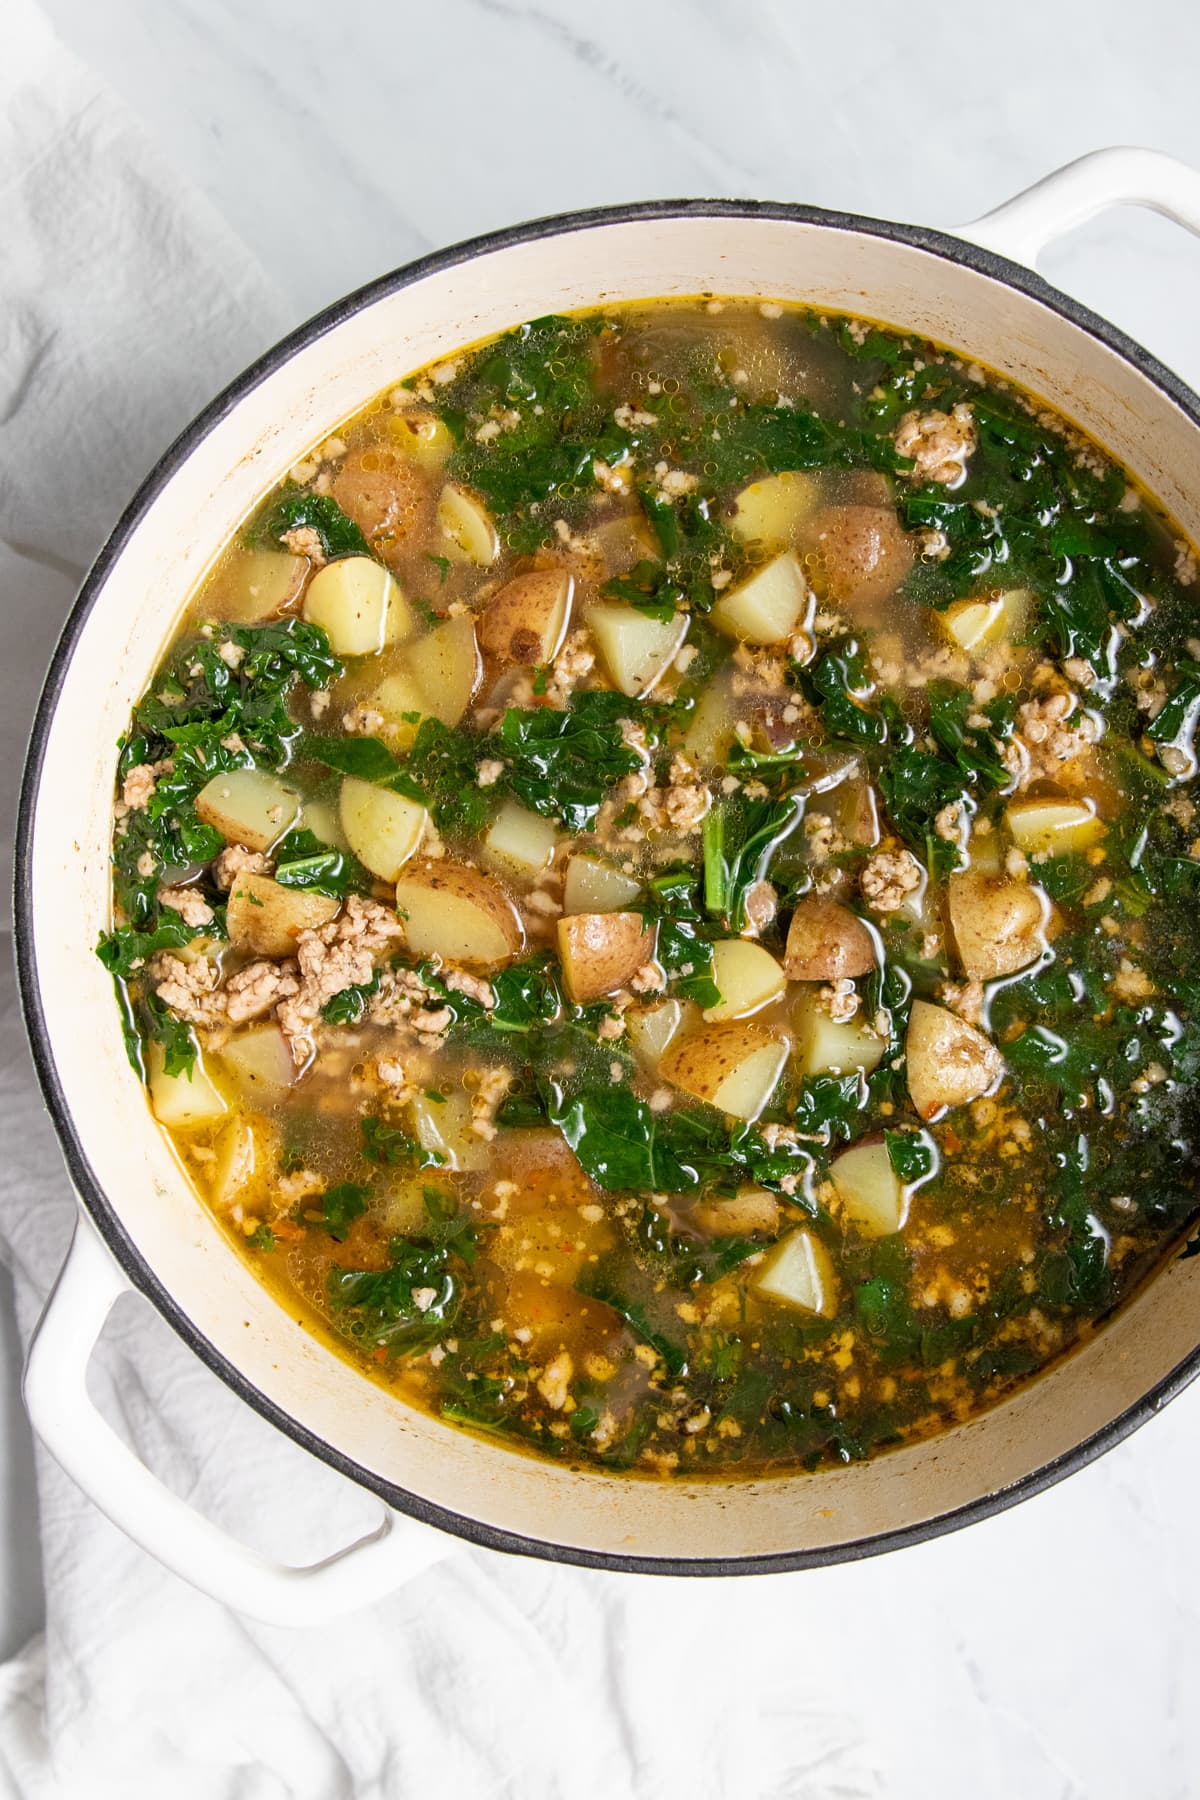 Looking down at a pot filled with a soup made with potatoes, kale, and sausage